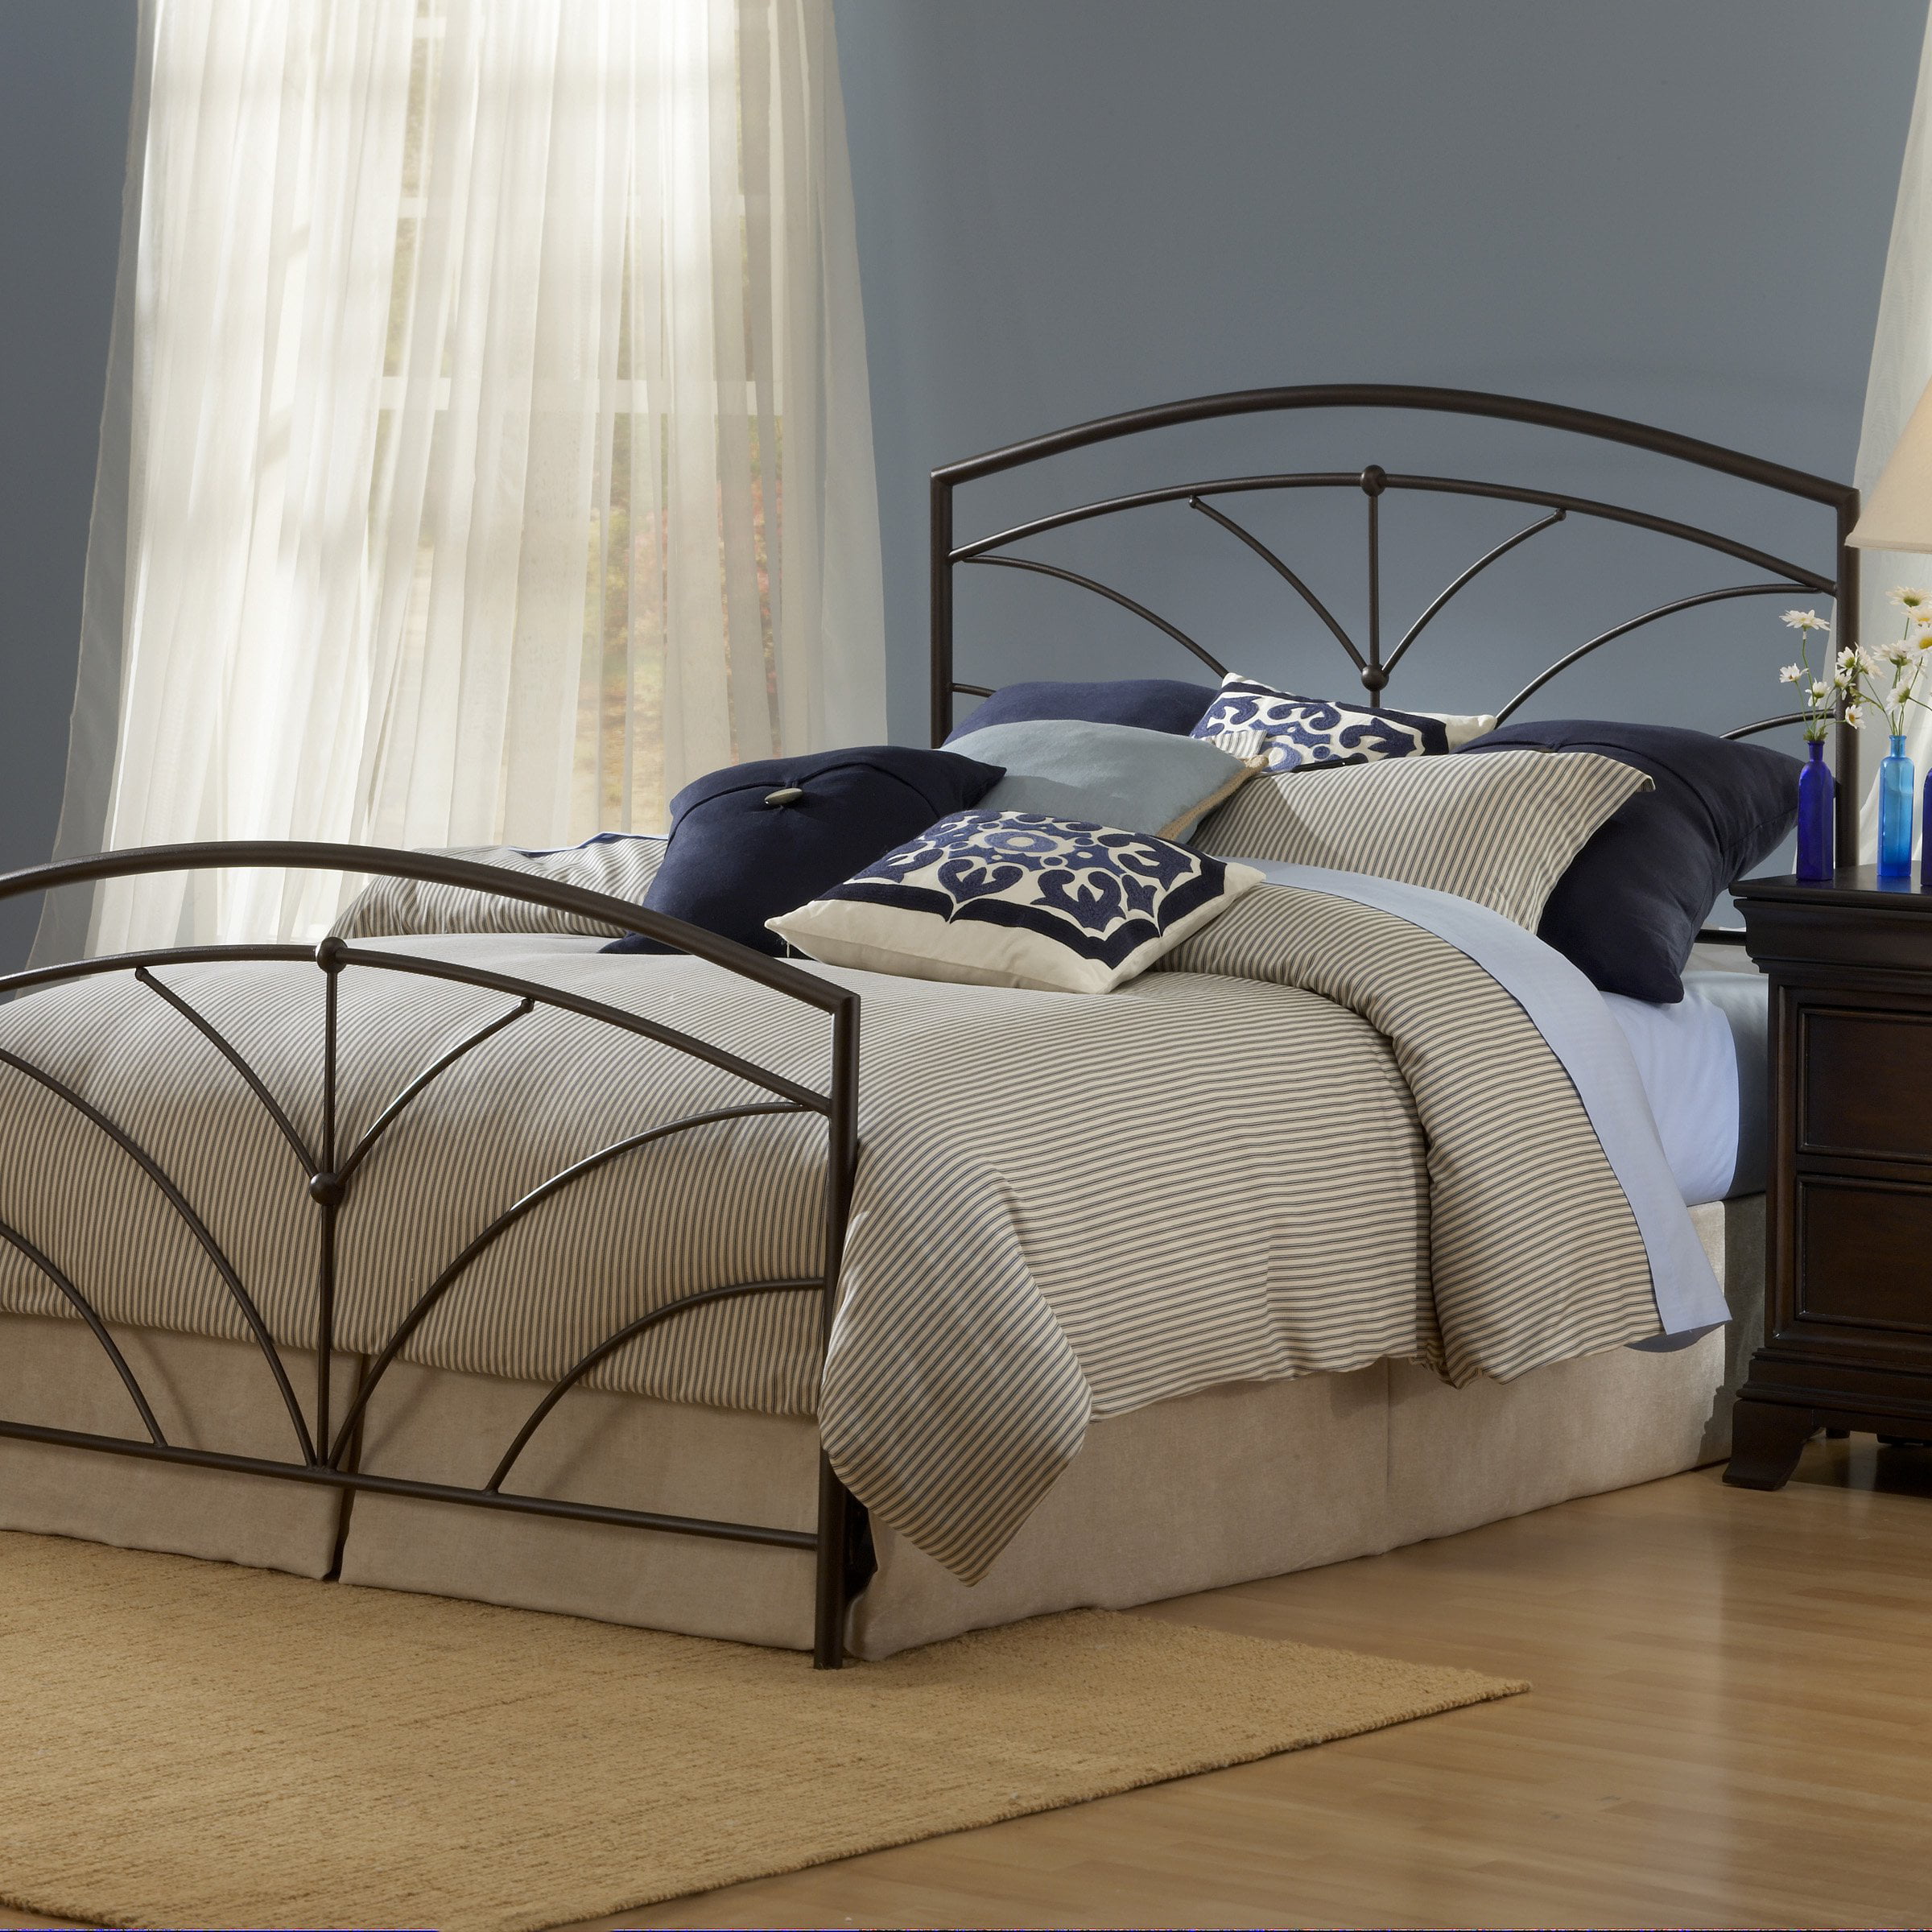 Thompson Bed King Headboard Only, Thompson King Bed